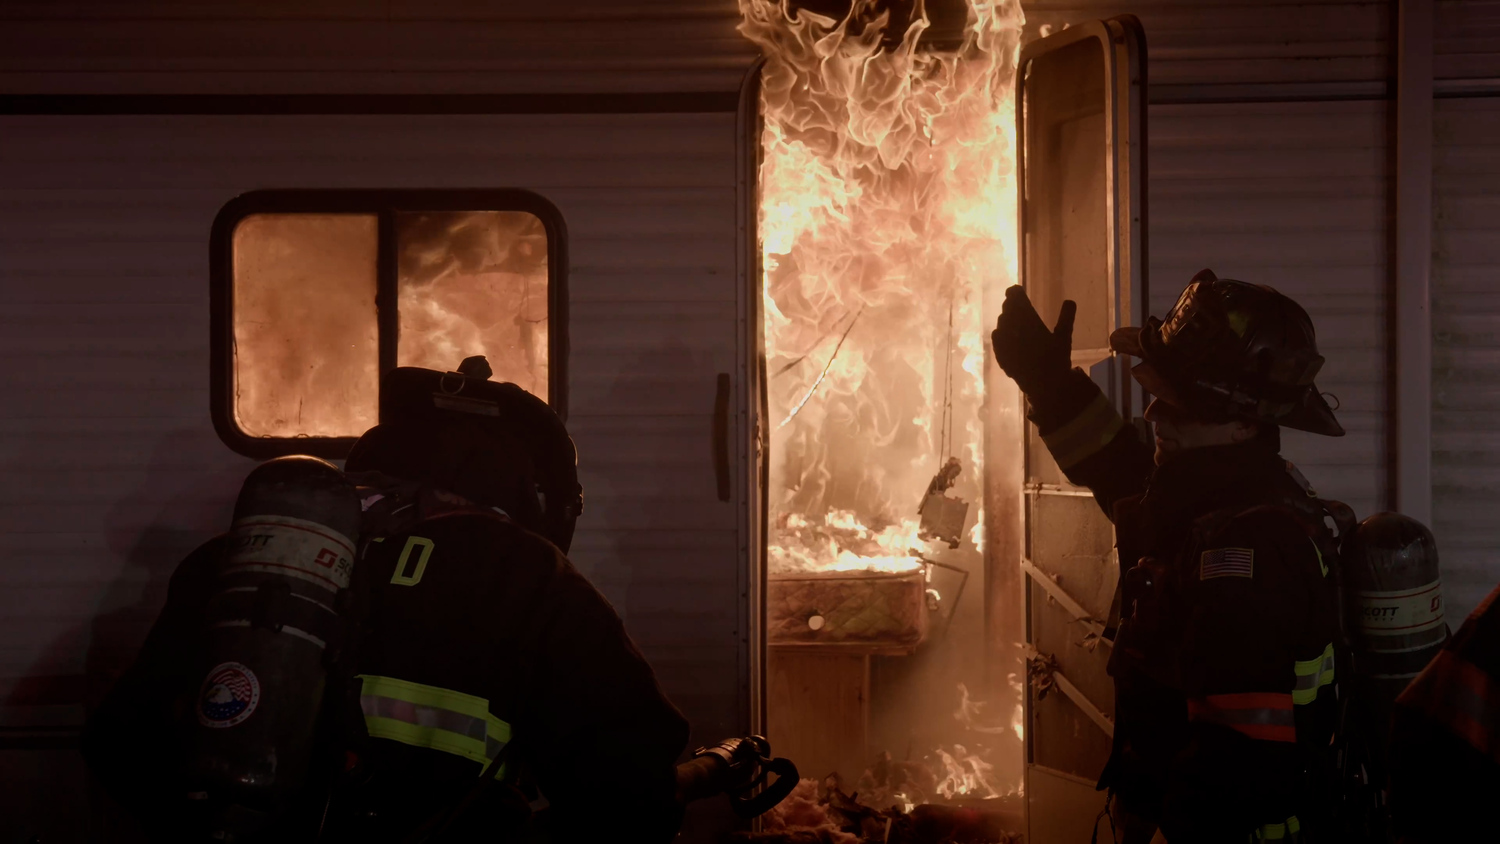 East Hampton Fire Department firefighters battle a blaze in a training exercise depicted in a recruiting video produced by East Hampton Village to attract new volunteers.